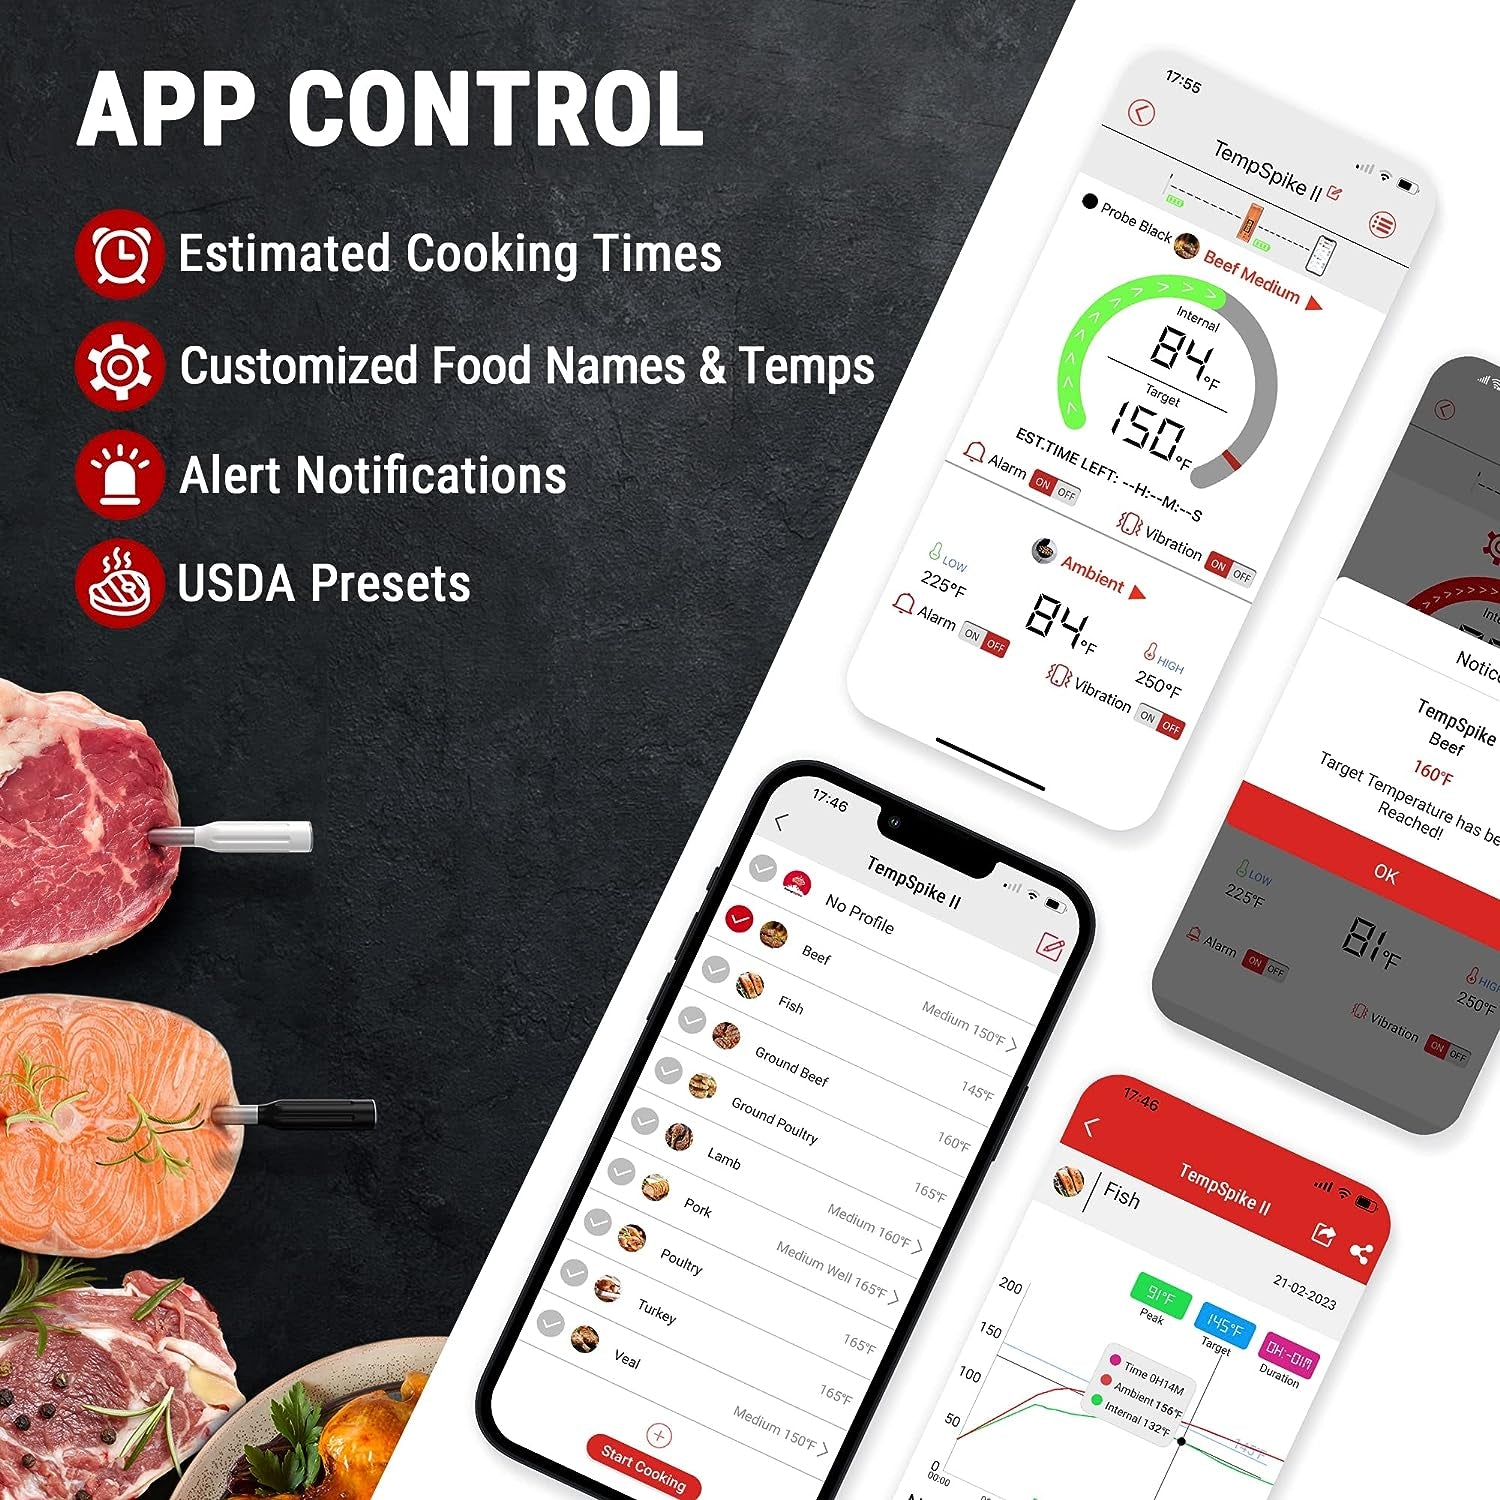  ThermoPro TempSpike Premium Truly Wireless Meat Thermometer up  to 500-Ft Remote Range, Bluetooth Meat Thermometer with Wire-Free Probe,  Meat Thermometer Wireless for Sous Vide Smoker Rotisserie : Home & Kitchen